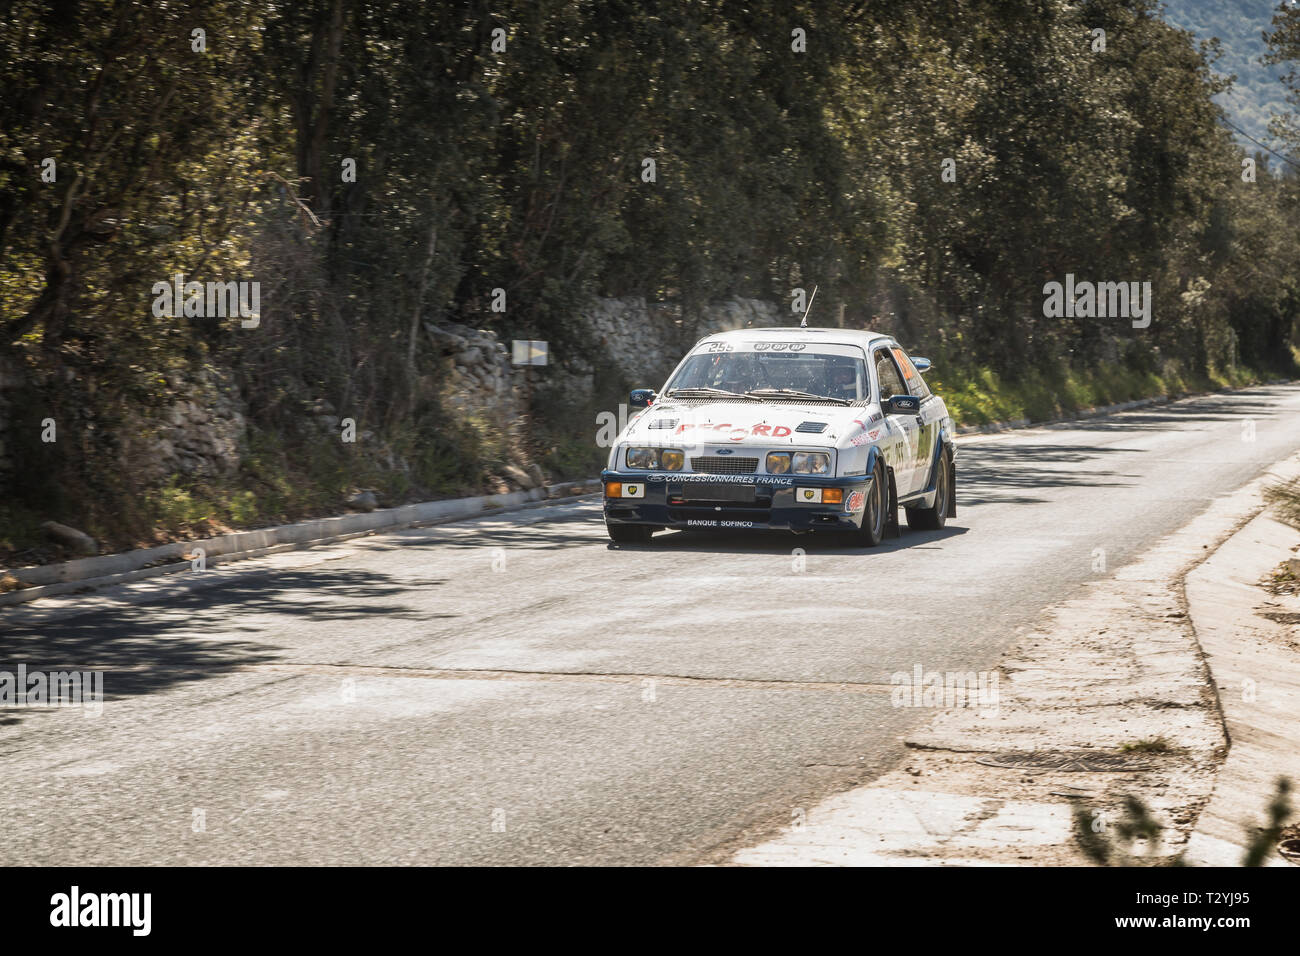 Regino, Corsica - 31st March 2019. J. Bally & V. Closier compete in Special Stage SS13 between Regino and Montemaggiore in Corsica in the 2019 Tour de Stock Photo